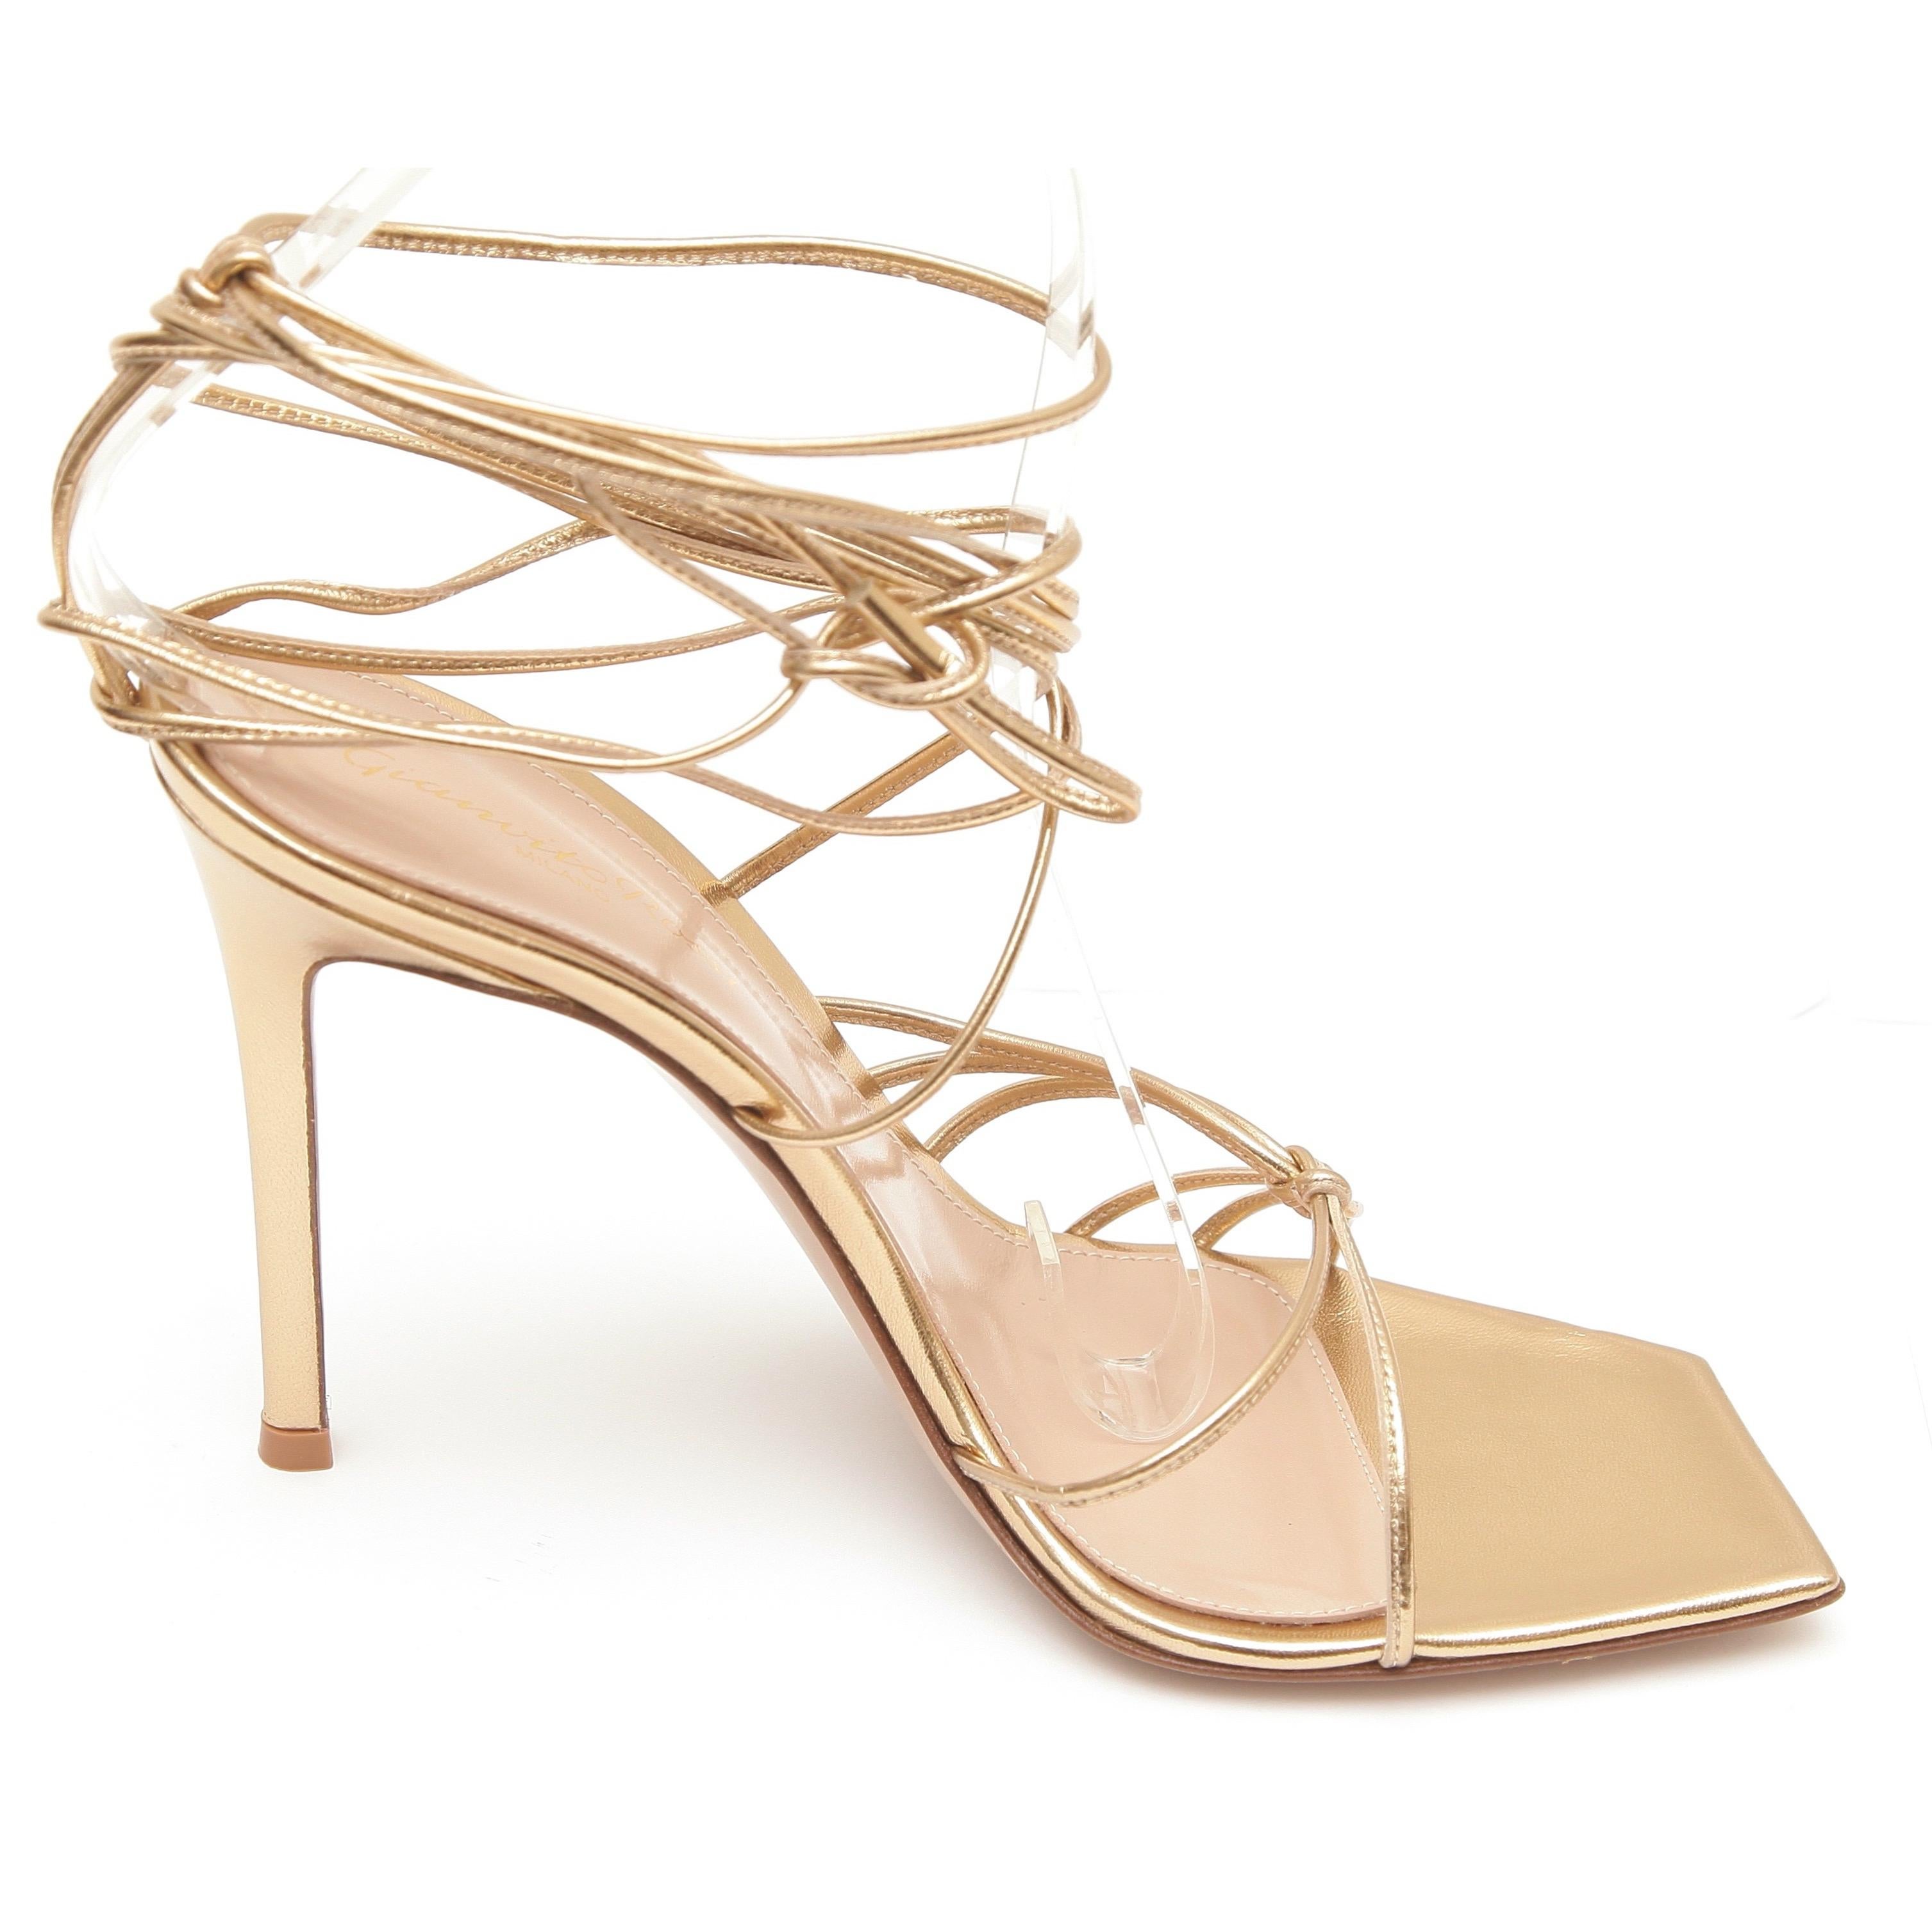 GUARANTEED AUTHENTIC GIANVITO ROSSI SYLVIE METALLIC ANKLE TIE SANDALS


Details:
- Metallic gold leather upper.
- Caged thin straps over vamp.
- Crisscross ankle tie closure.
- Leather insole and sole.
- Comes with box and dust bag.

Size: